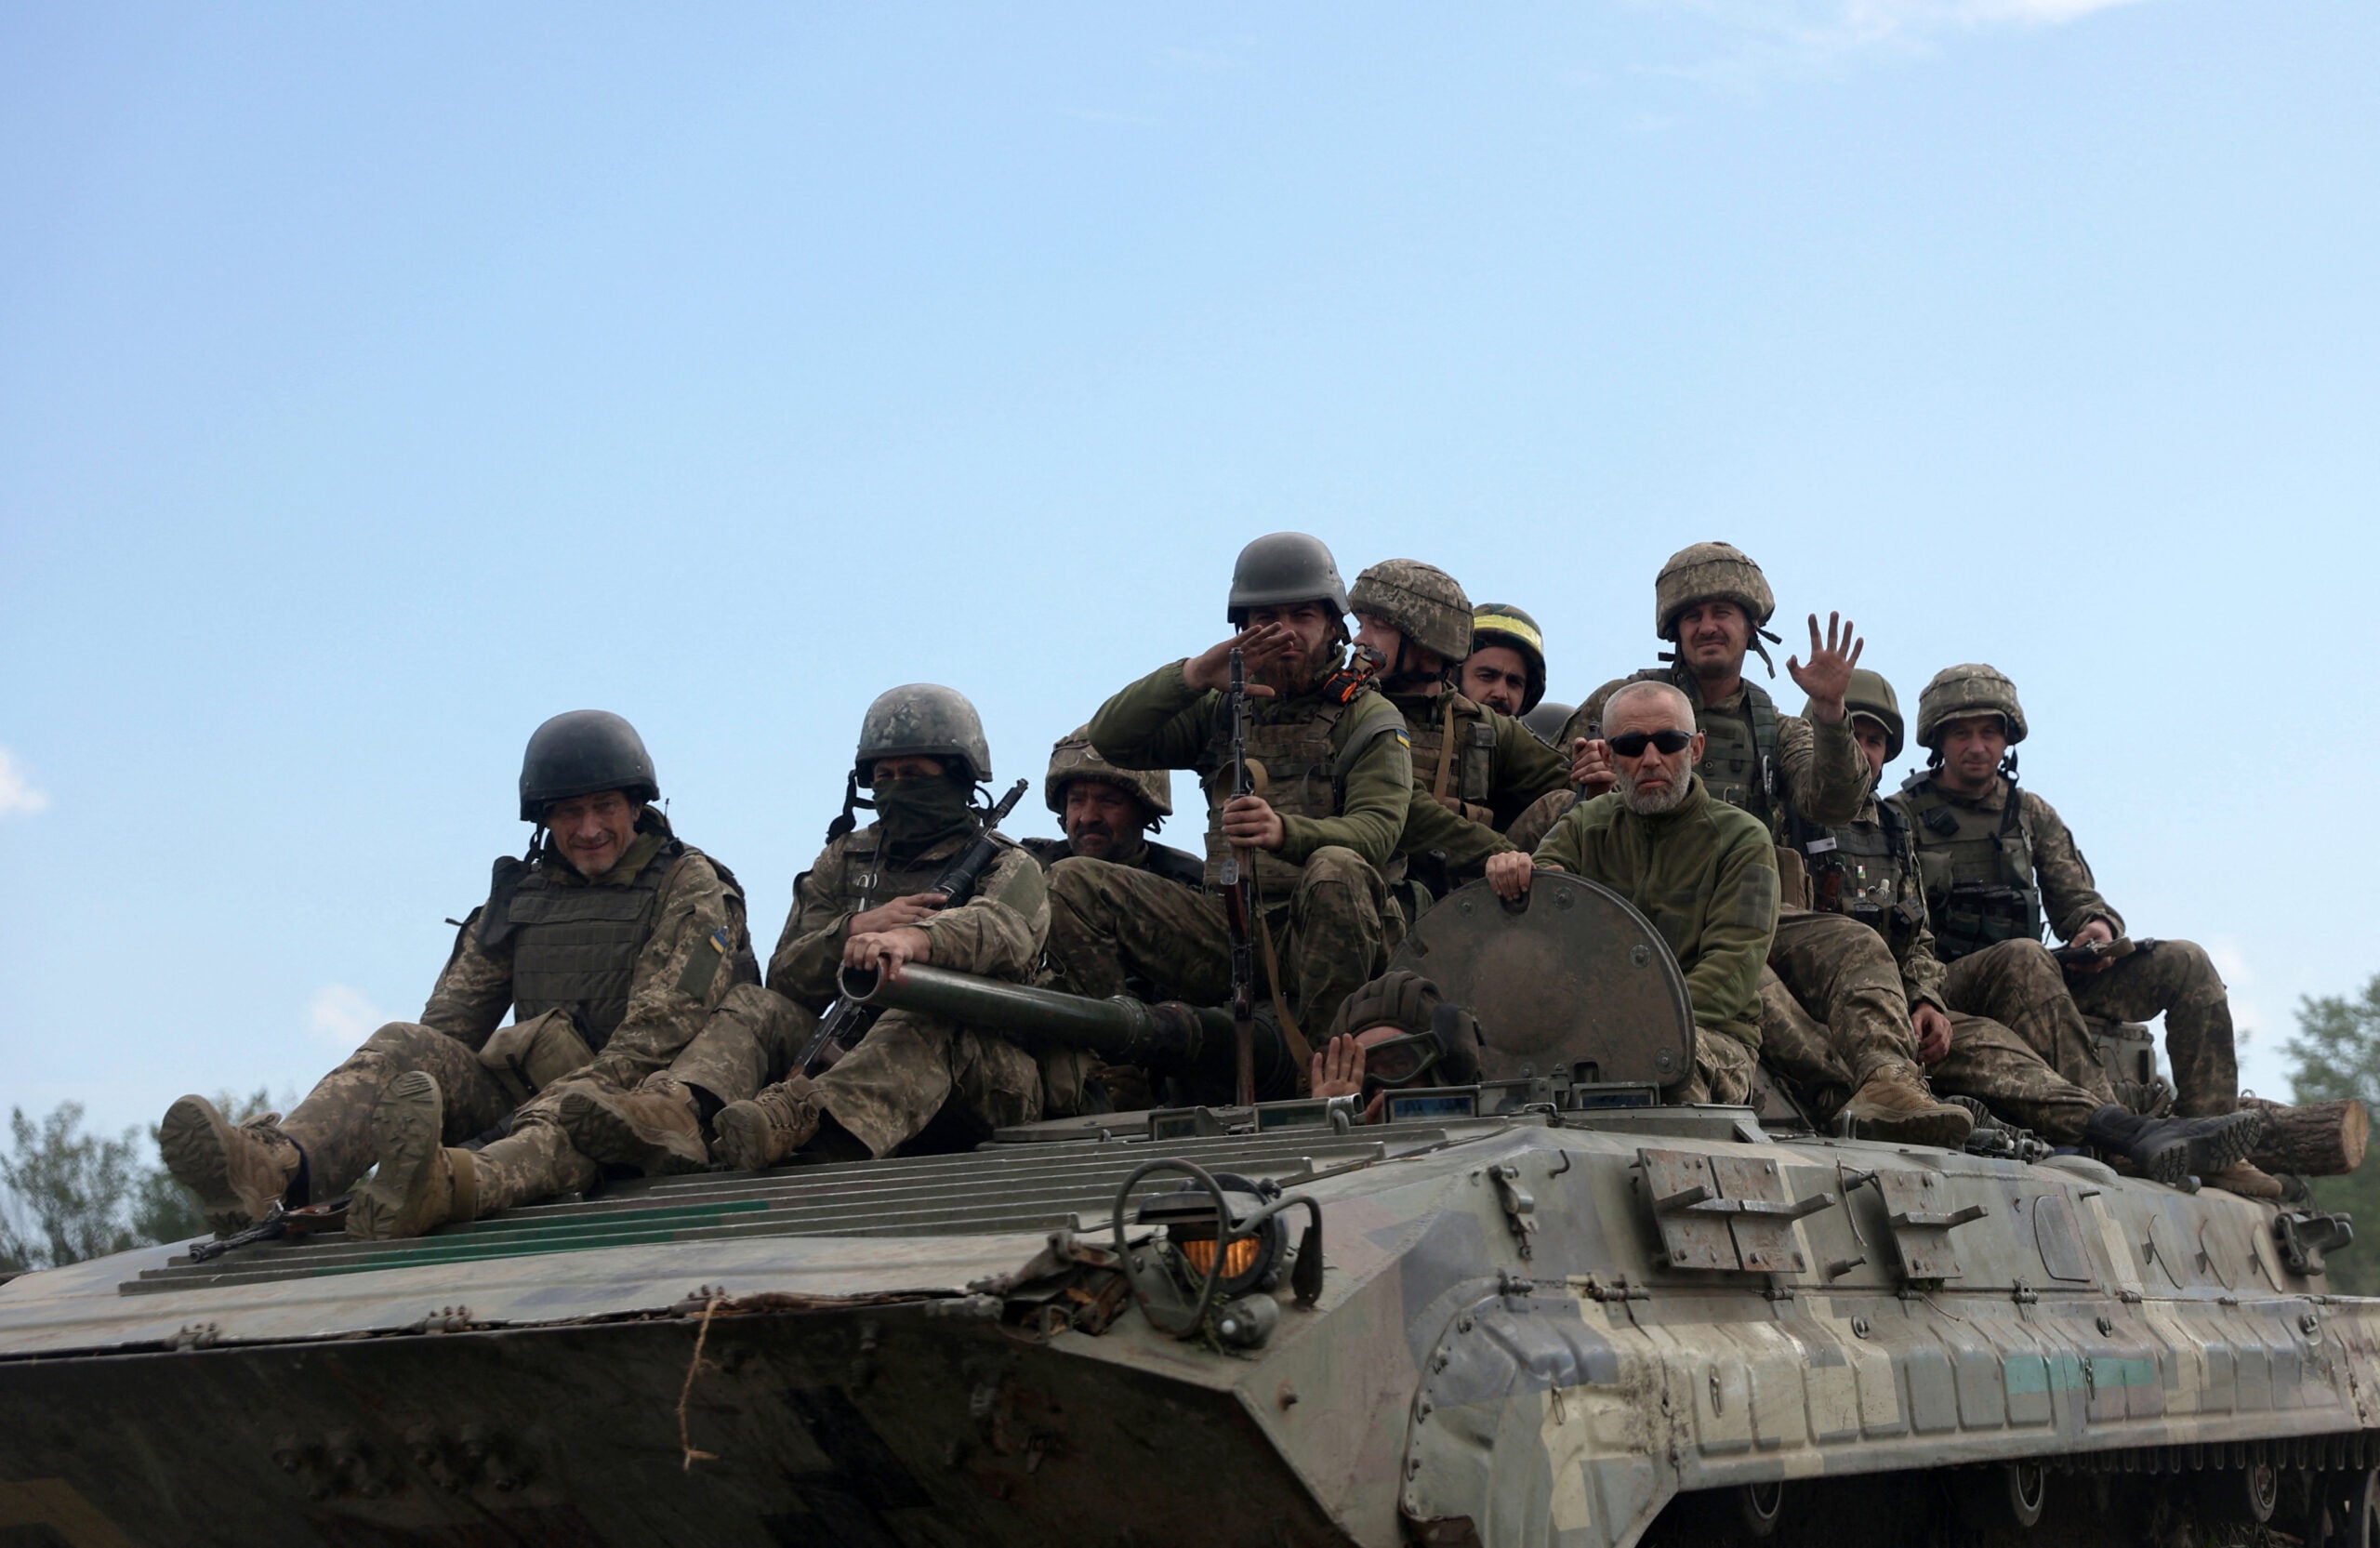 What Russia’s capture of US vets means for Americans fighting in Ukraine